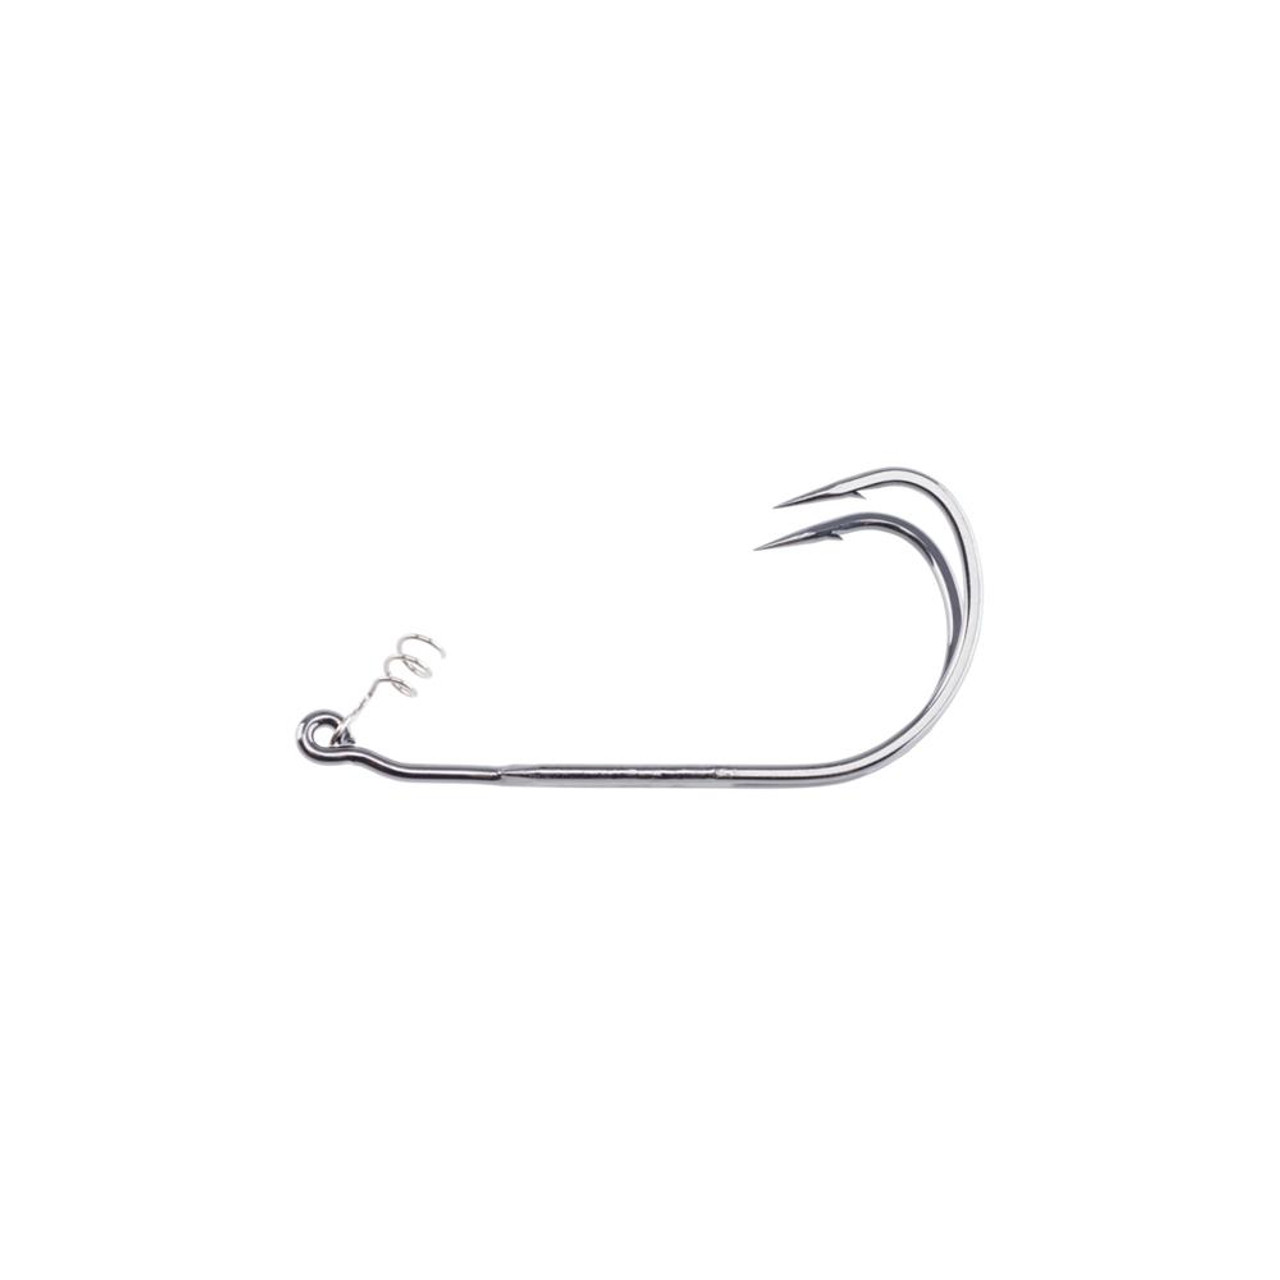 Berkley Fusion19 Frog Hook - Yeager's Sporting Goods